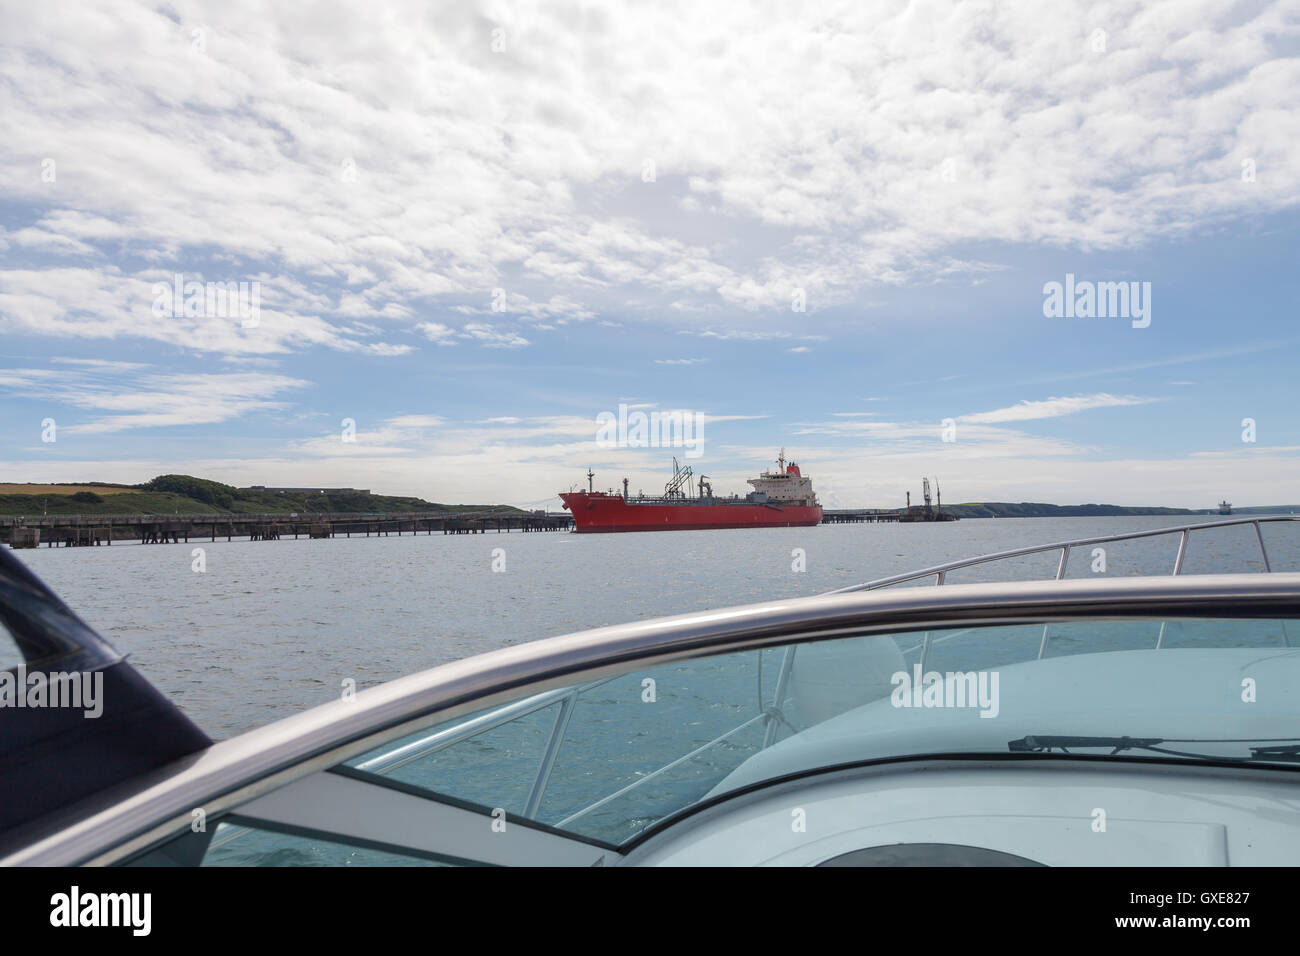 Oil tanker from a boat at Milford Haven, Pembrokeshire, Wales. Stock Photo